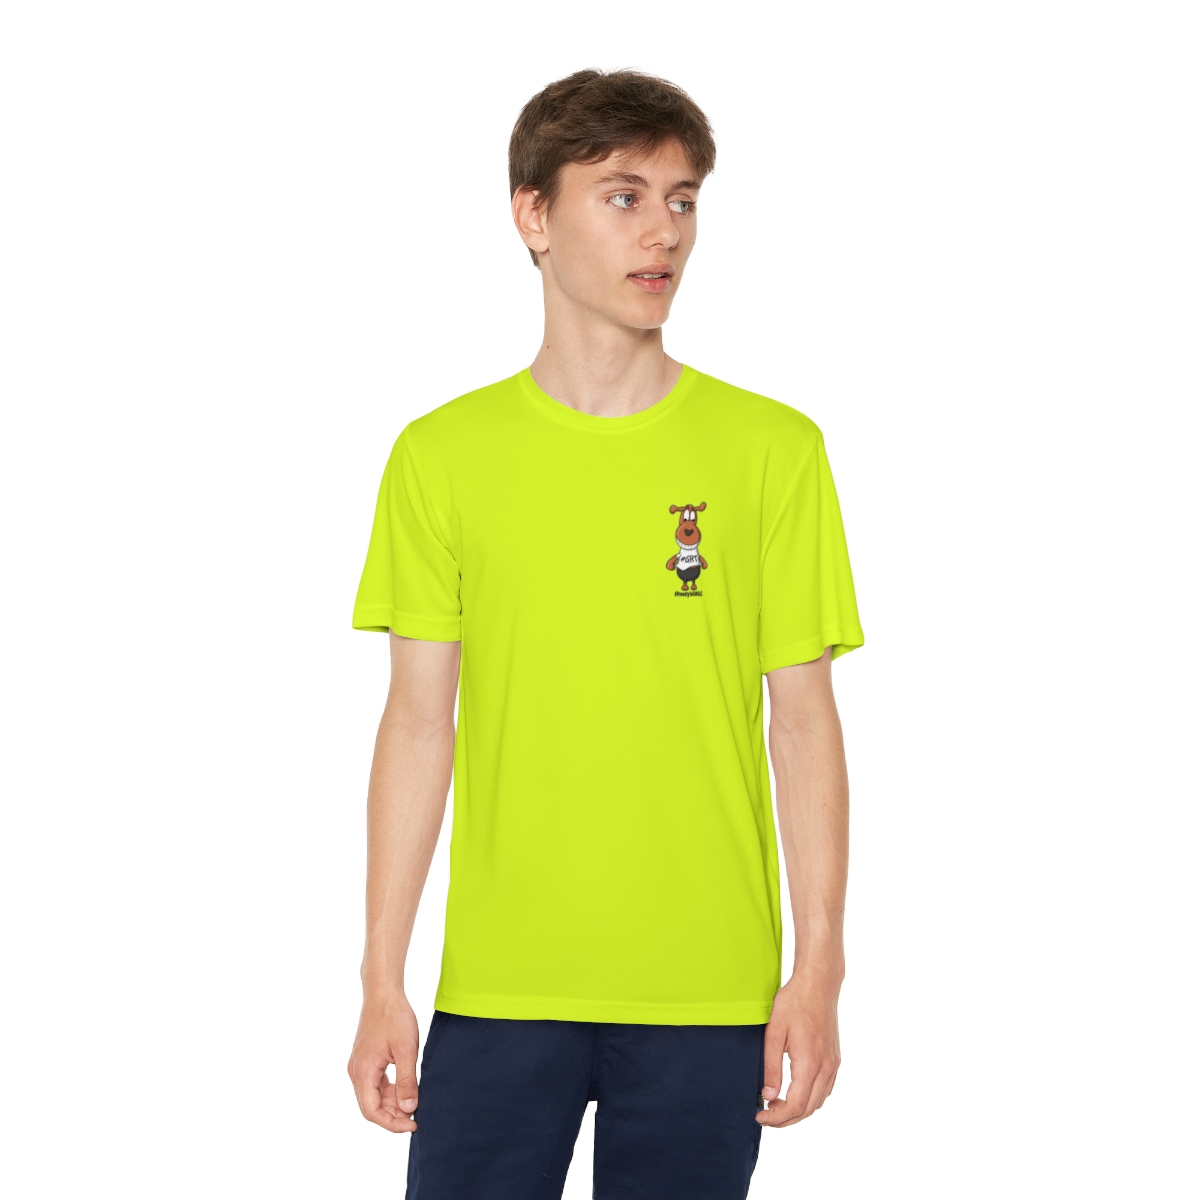 Youth LIVING LIFE FREESTYLE FREDDY Tee product thumbnail image